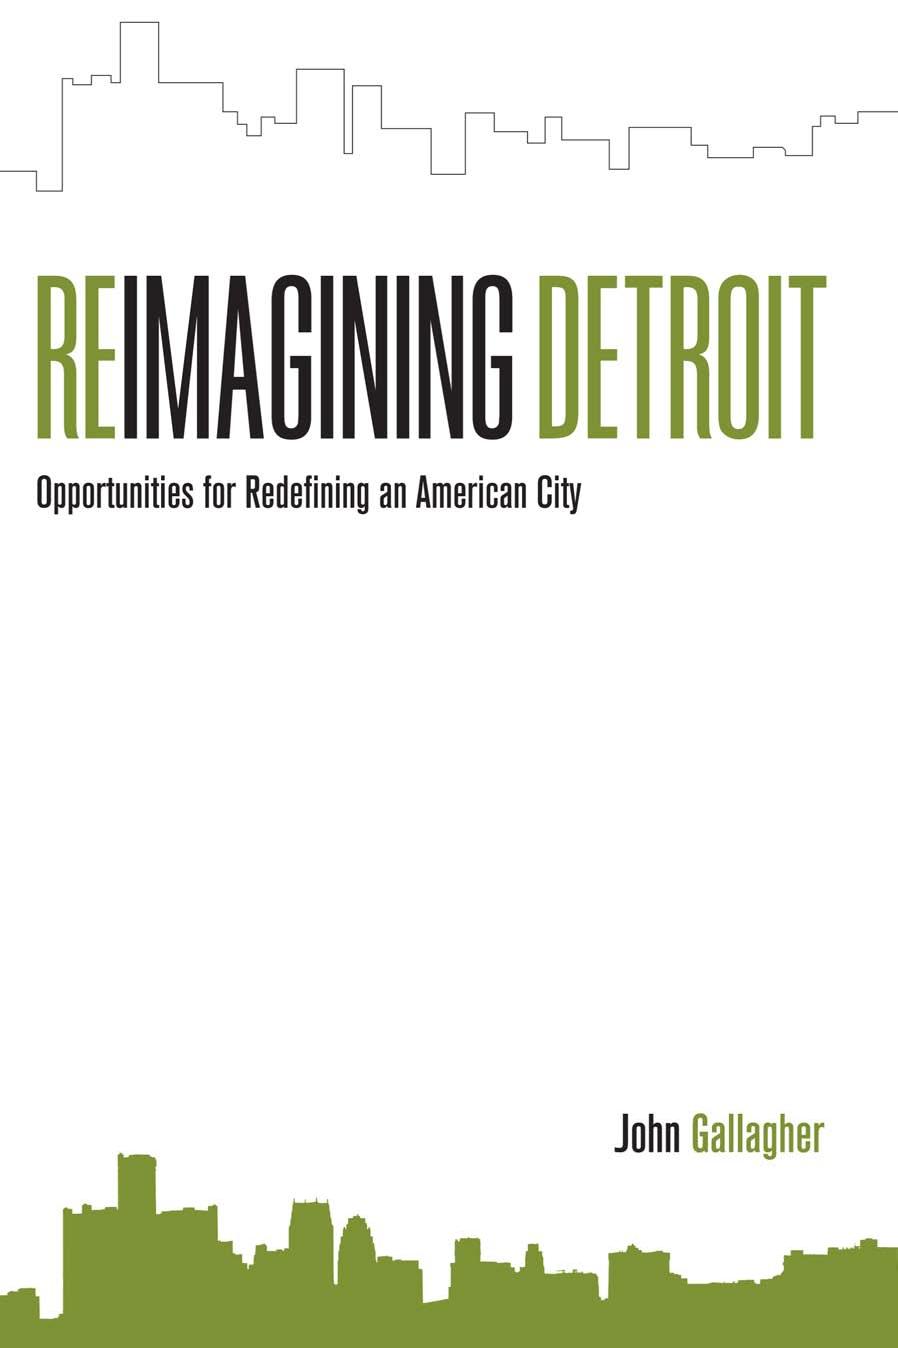 Reimagining Detroit : Opportunities for Redefining an American City by John Gallagher